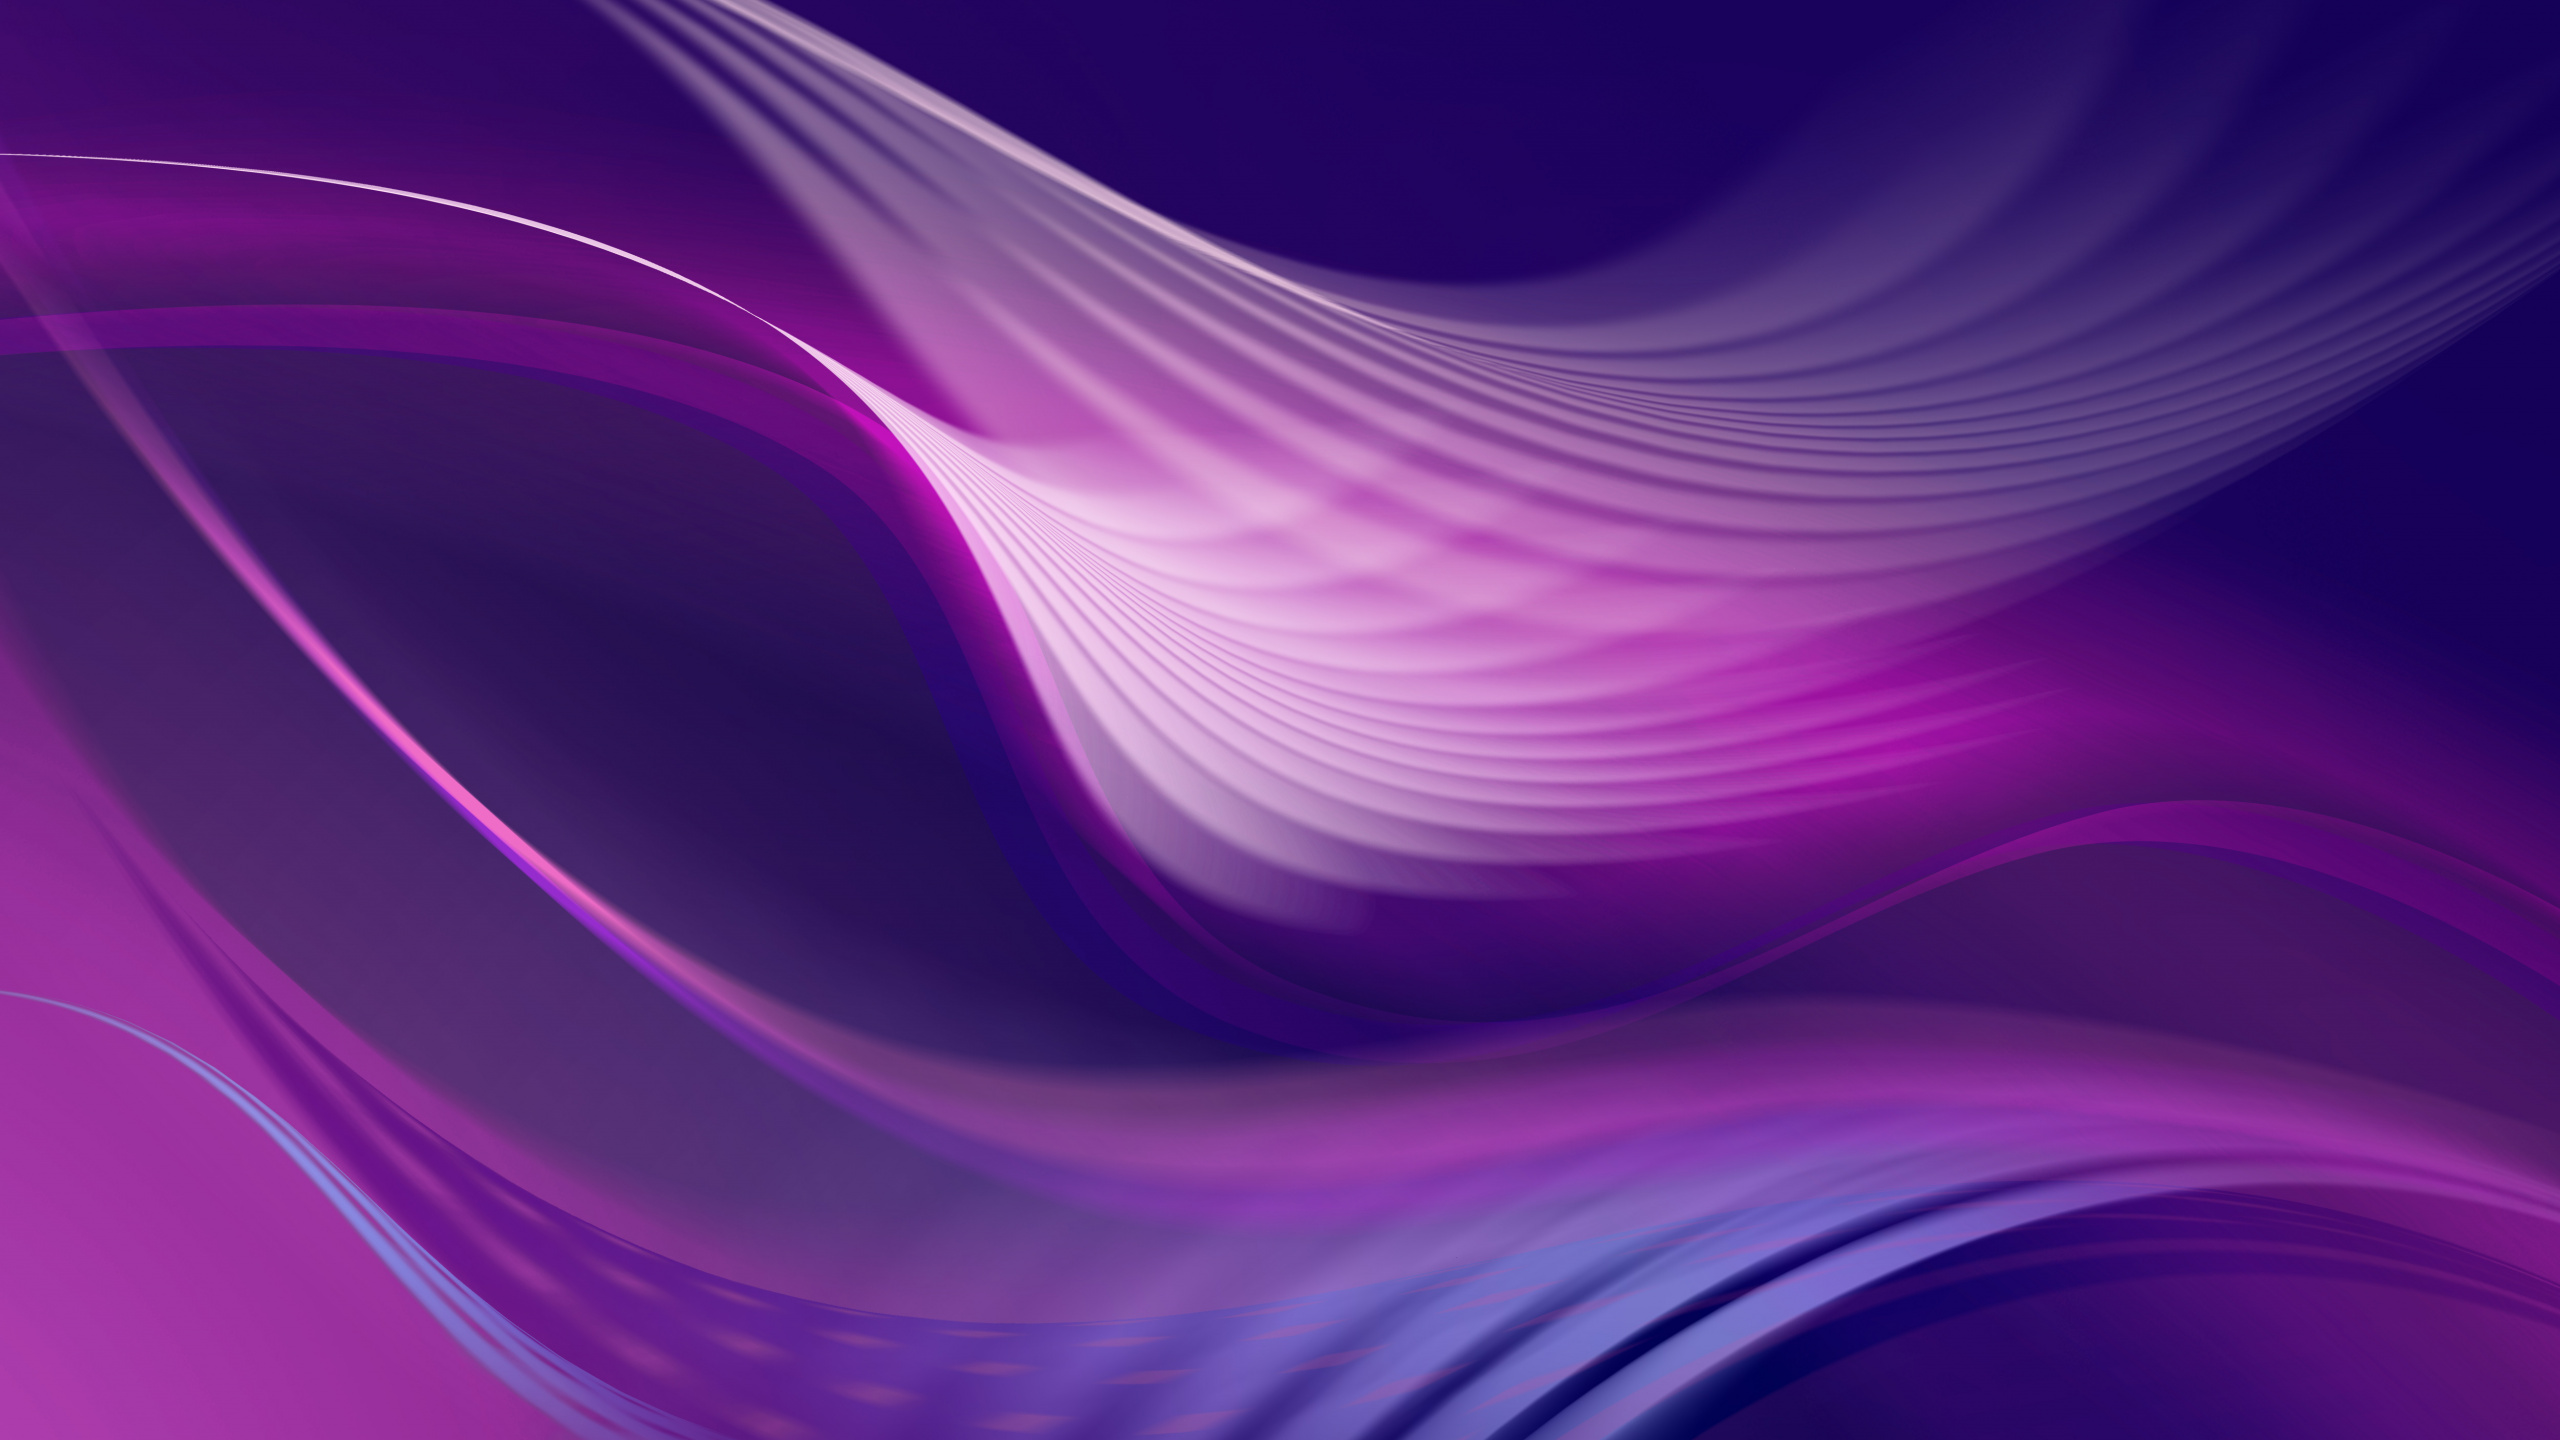 Purple and White Light Illustration. Wallpaper in 2560x1440 Resolution